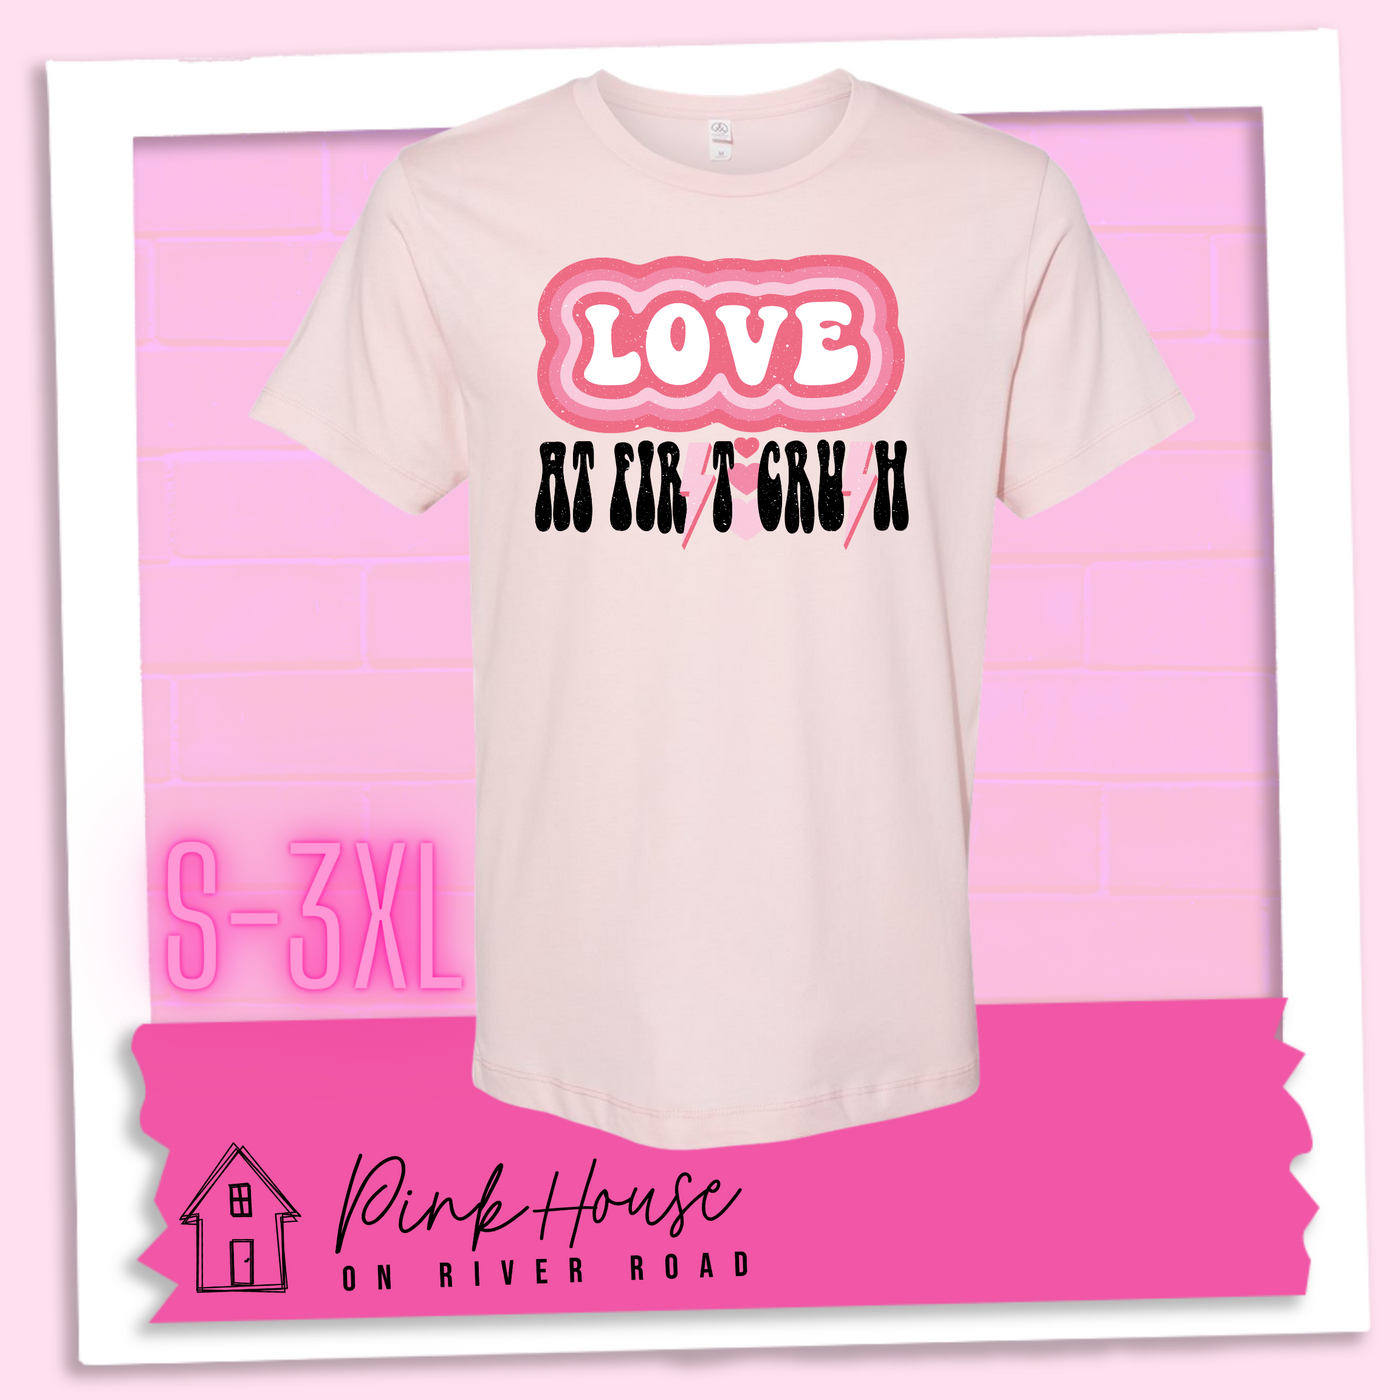 Faded Pink Tee. The graphic has the word Love in retro bubble letters with differetn colored pink outlines radiating from the word, underneath are the worxs at first in black with the s in first replaced with a pink lightning bolt, then there are three different colored hearts followed by the word crush in the same black font with the S replaced with the same pink lightening bolt.